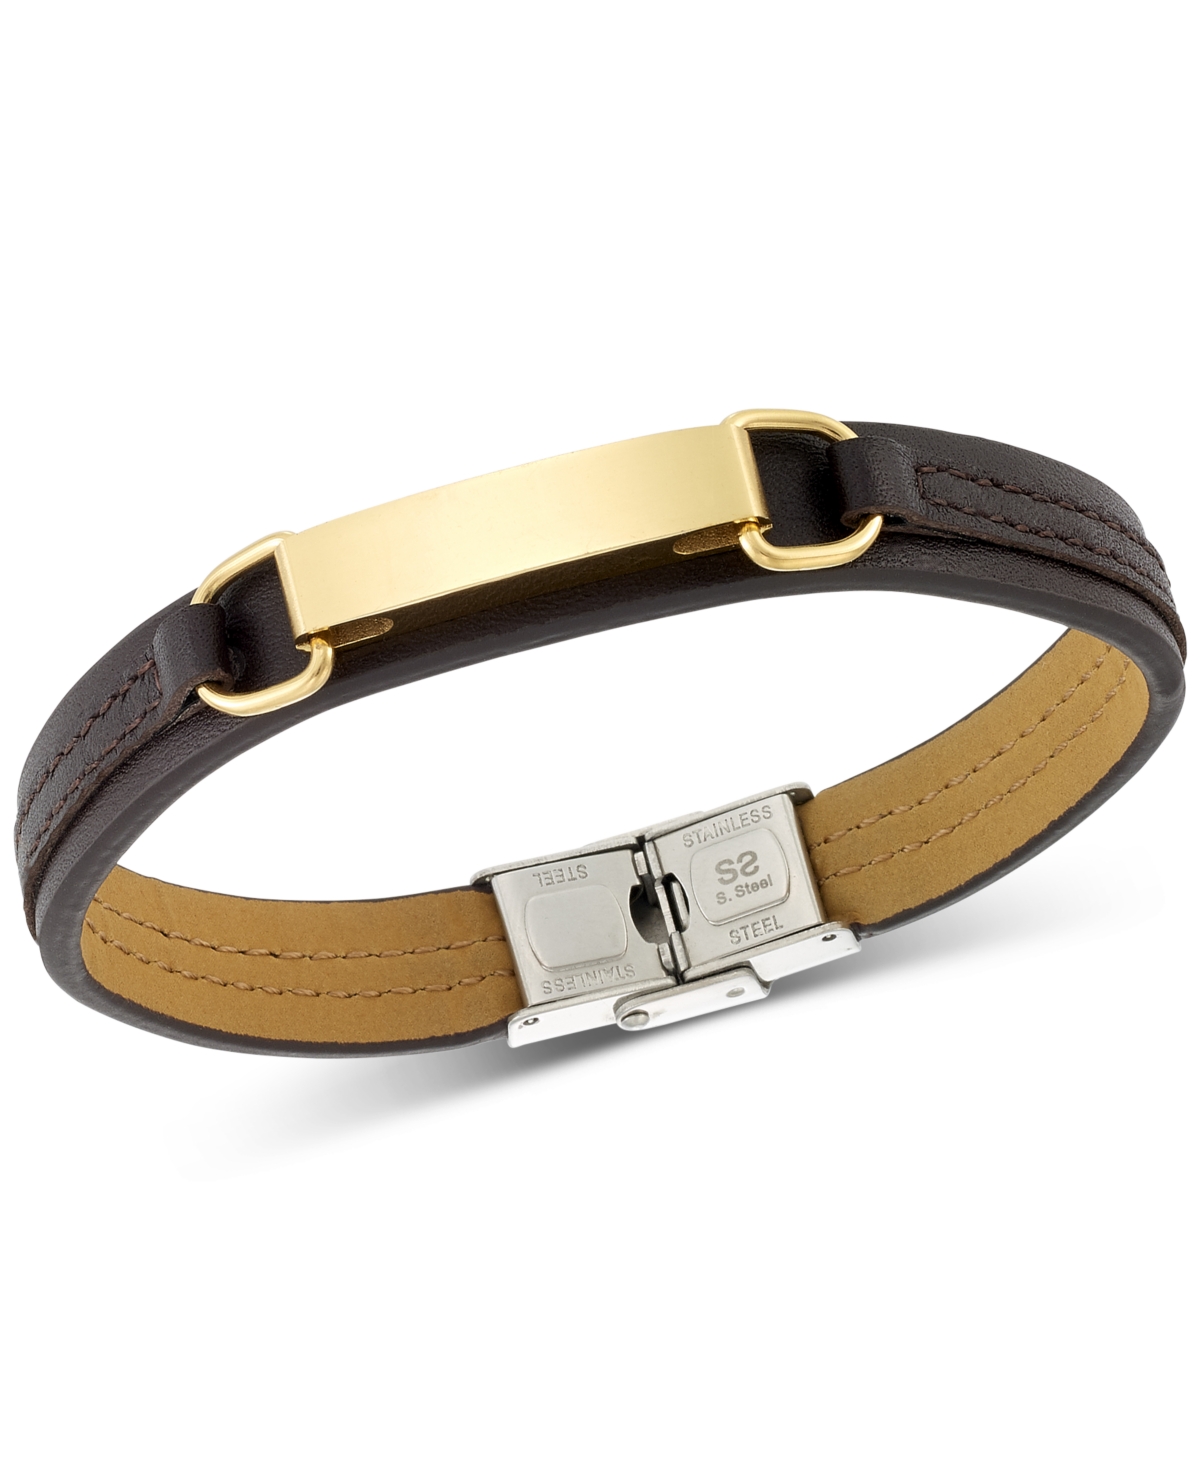 Smith Id Plate Brown Leather Bracelet in Stainless Steel Yellow Ion-Plate - Gold Tone Over Stainless Steel